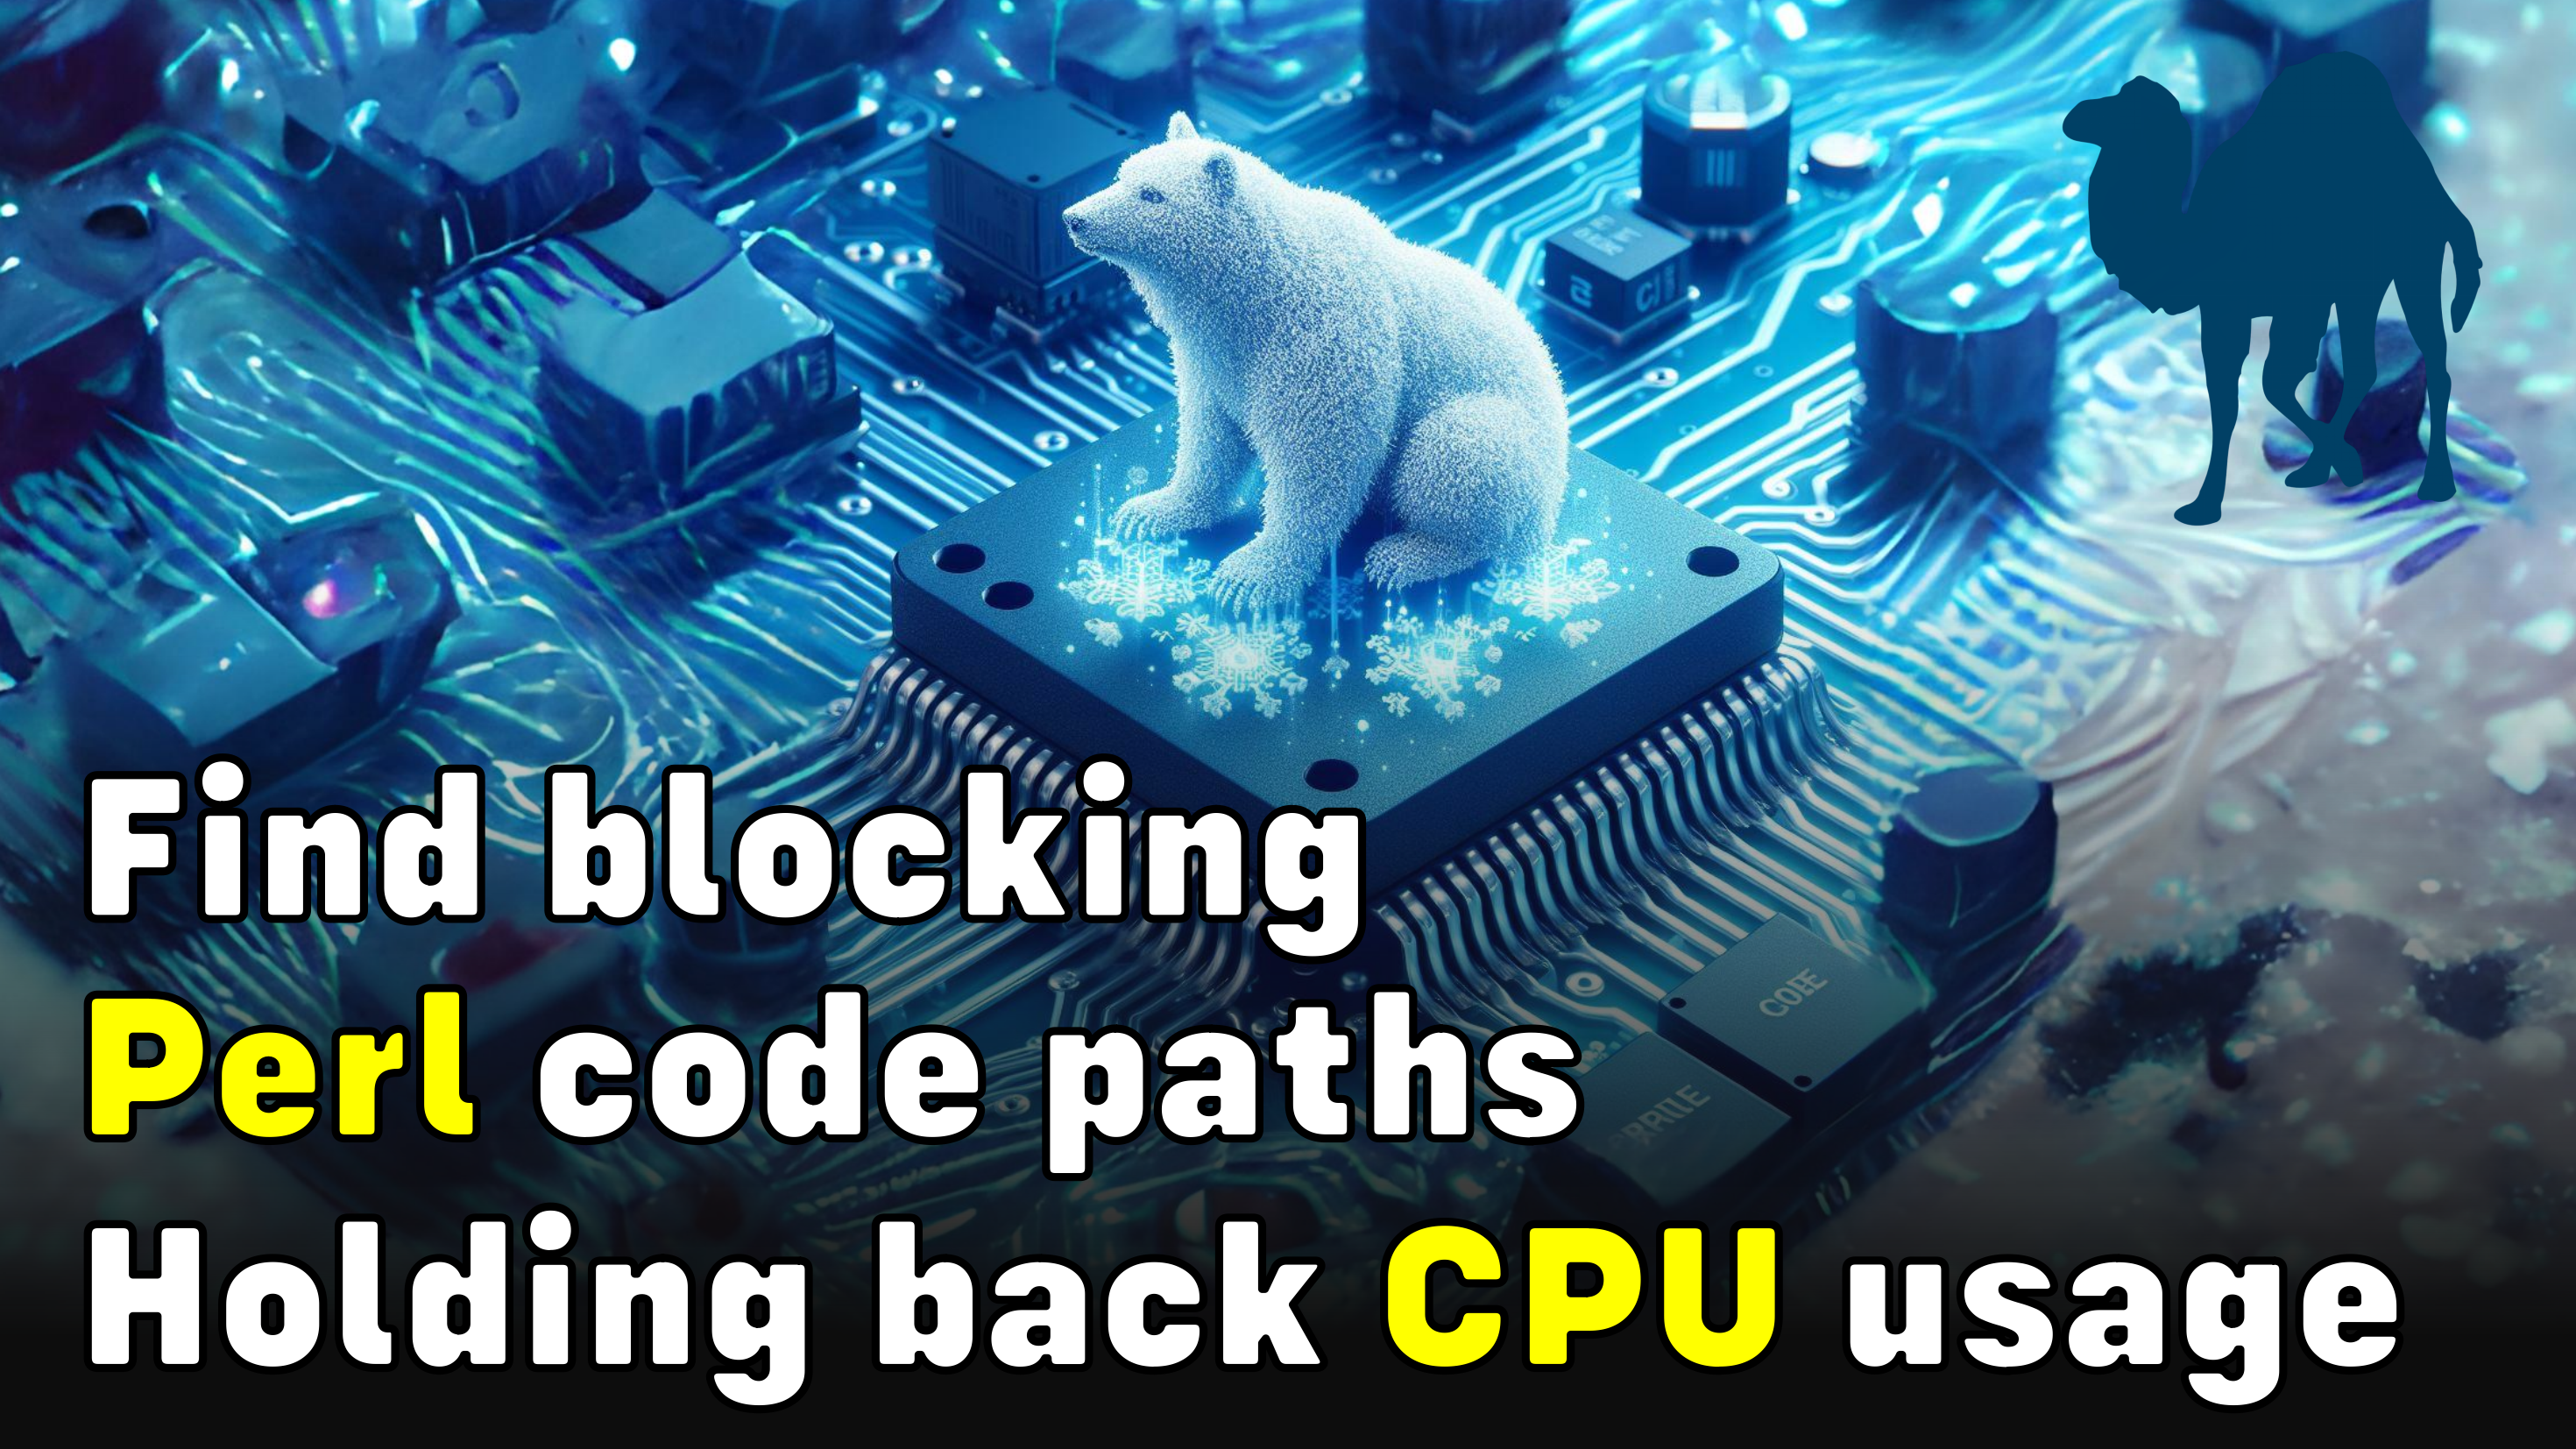 Find Blocking Perl Code Paths Holding back CPU Usage (Using OpenResty XRay)